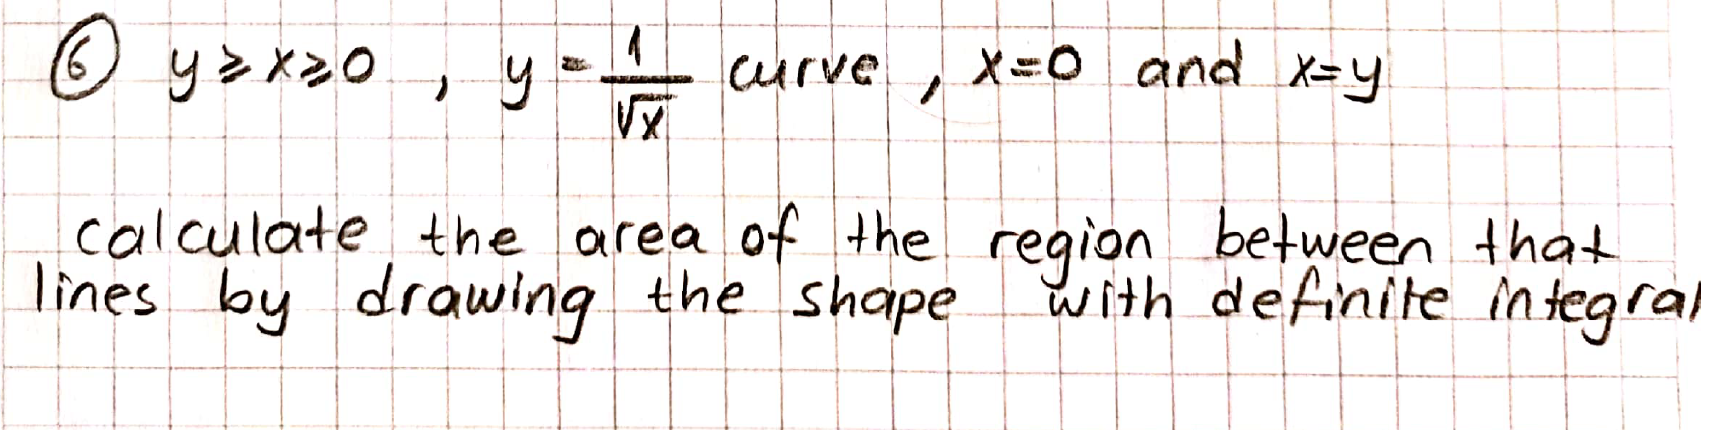 Curve
x=0 and X=y
alculate the area of the region between that
es by drawing the shape
with definite in tegral
